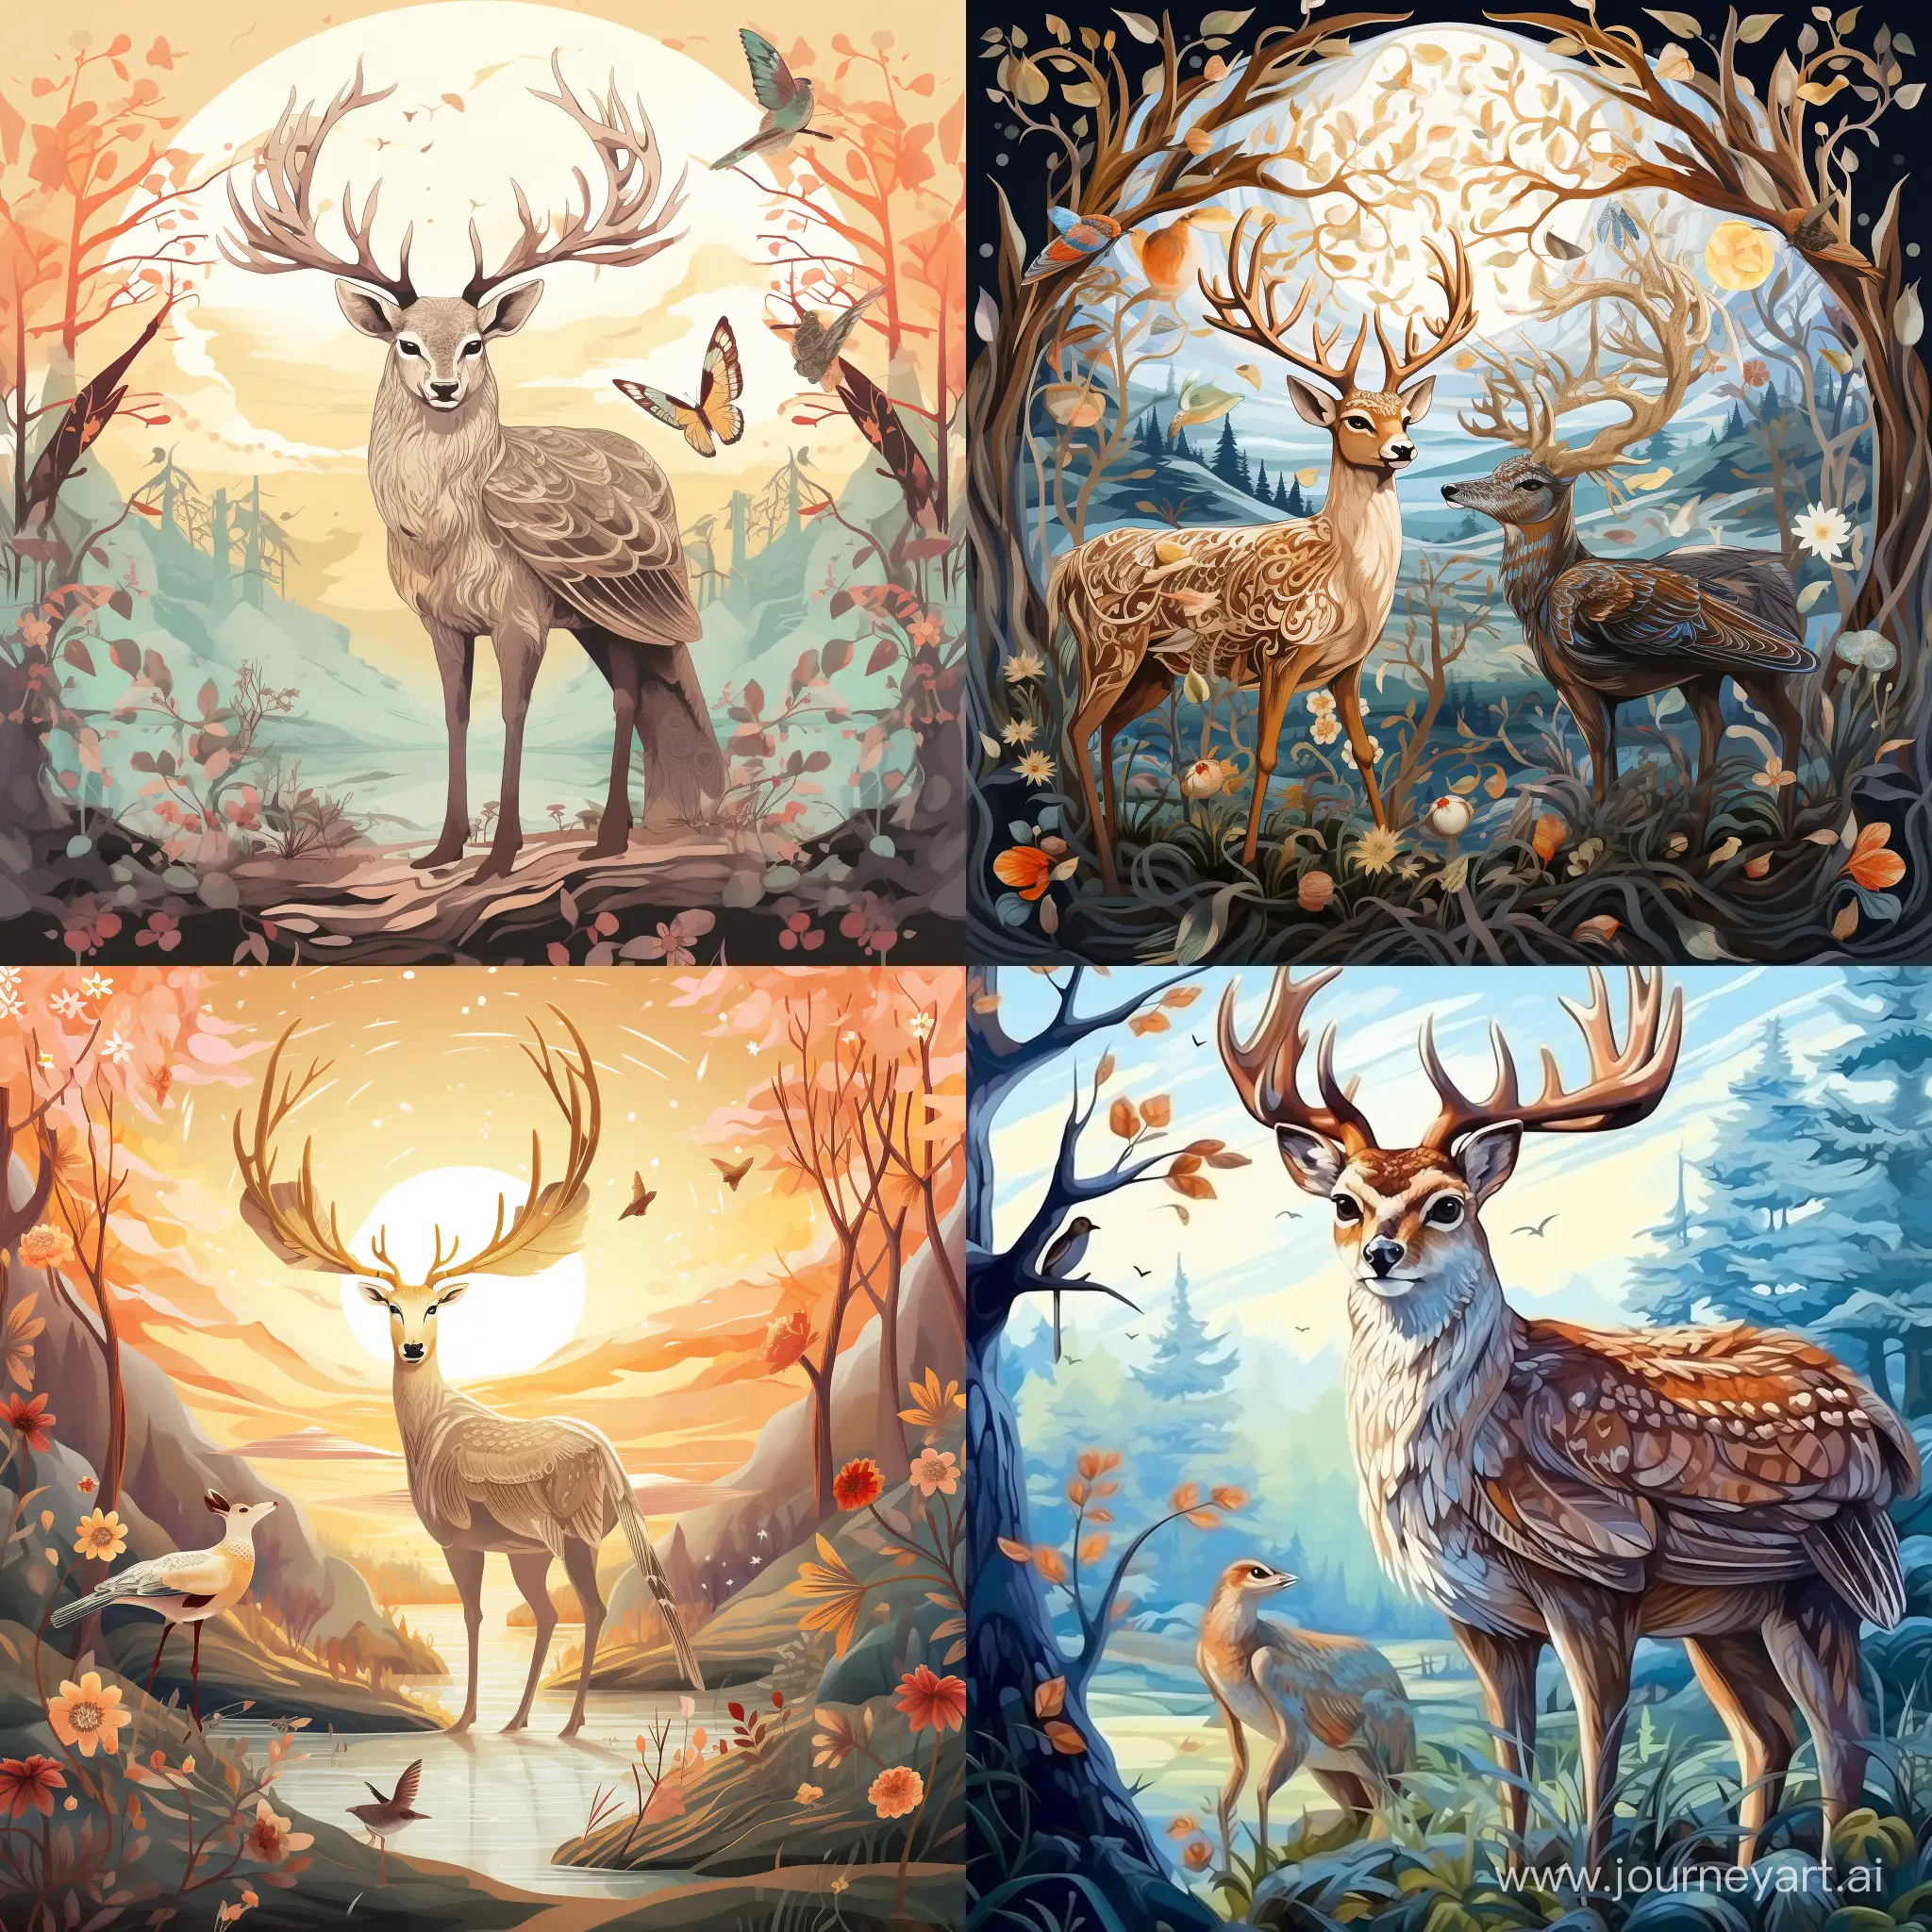 Enchanting-Fairytale-Scene-with-Old-Owl-and-Graceful-Deer-in-a-Land-of-Endless-Wonders